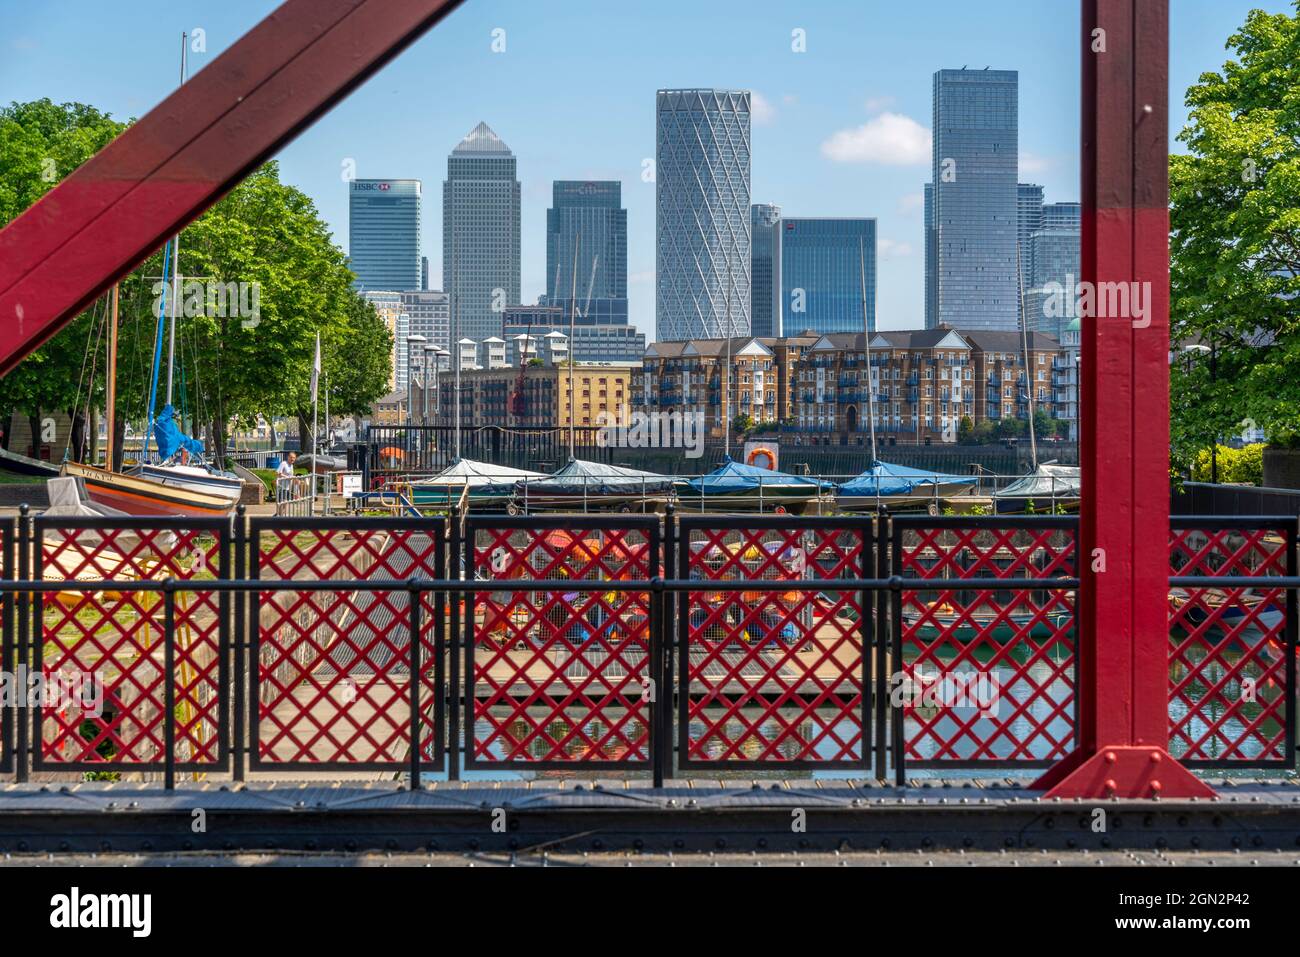 View of Canary Wharf Financial District and Bascule Bridge at the Shadwell Basin, Wapping, London, England, United Kingdom, Europe Stock Photo